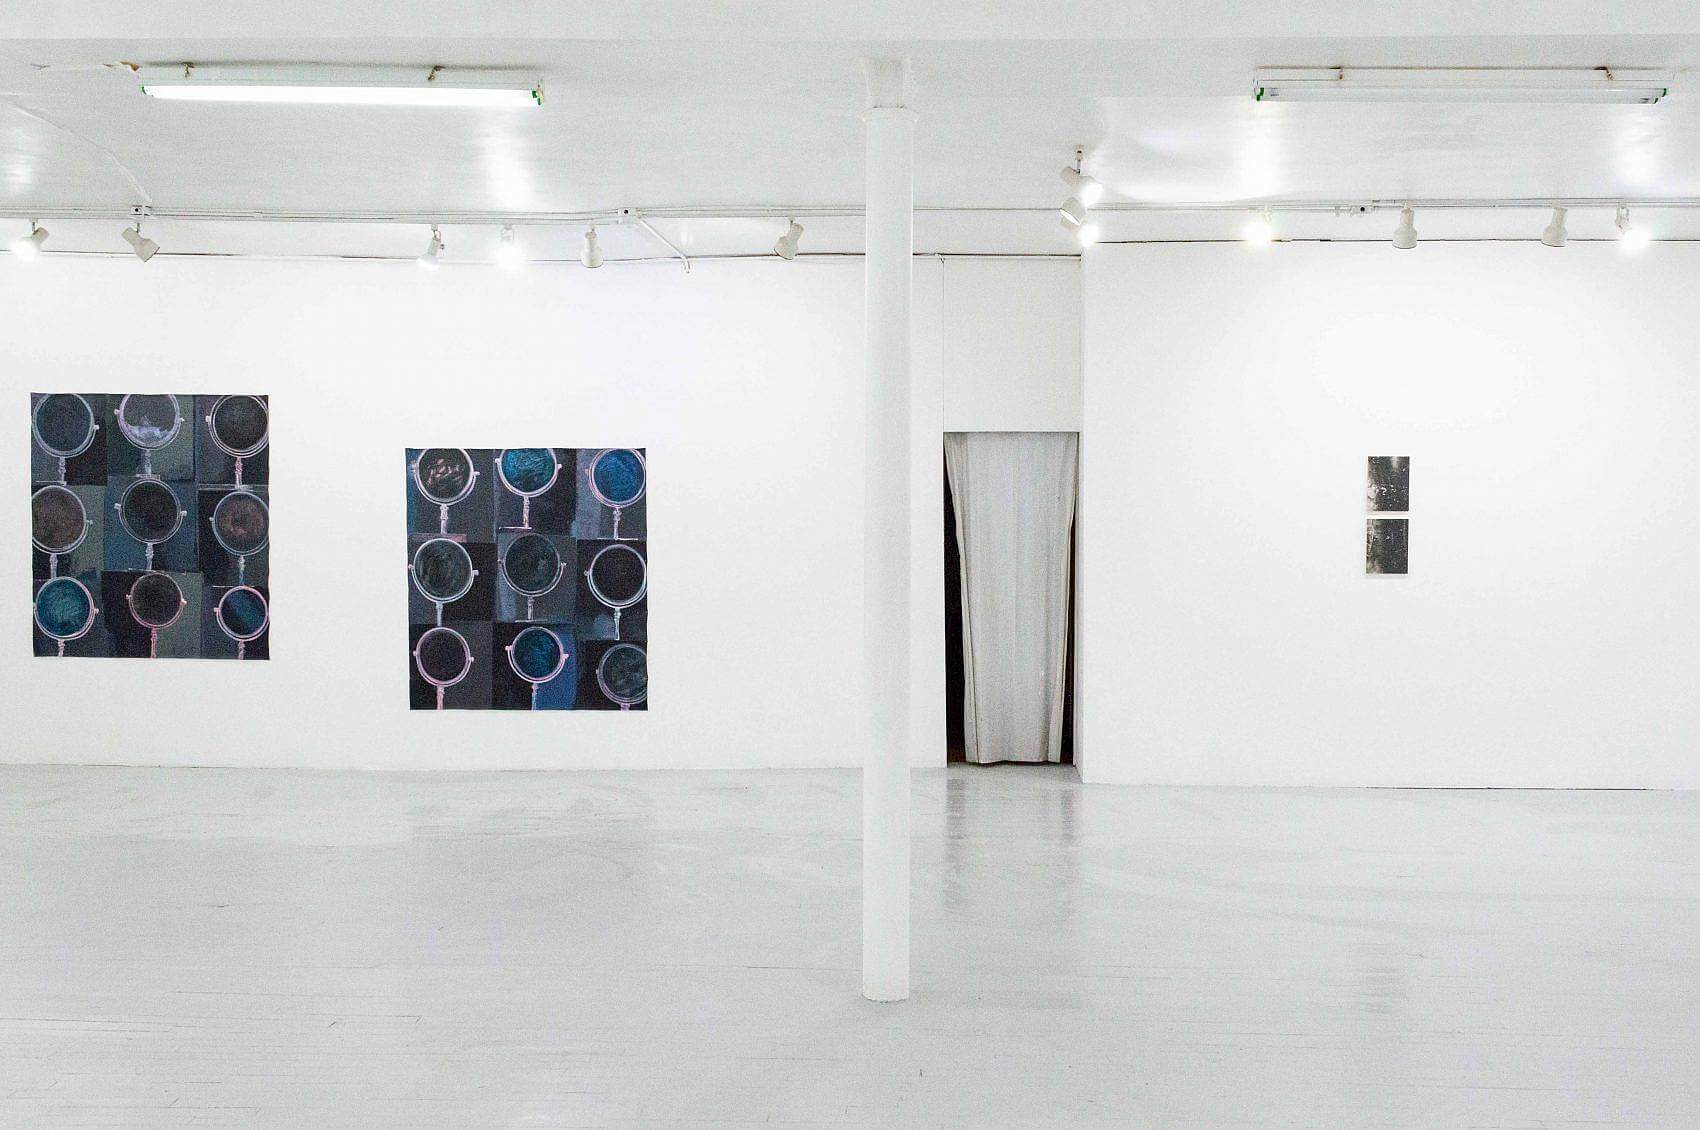 This is an installation shot of the exhibition. In the center is a doorway out of the gallery. To the left, is one painting from Madeline Gallucci's 